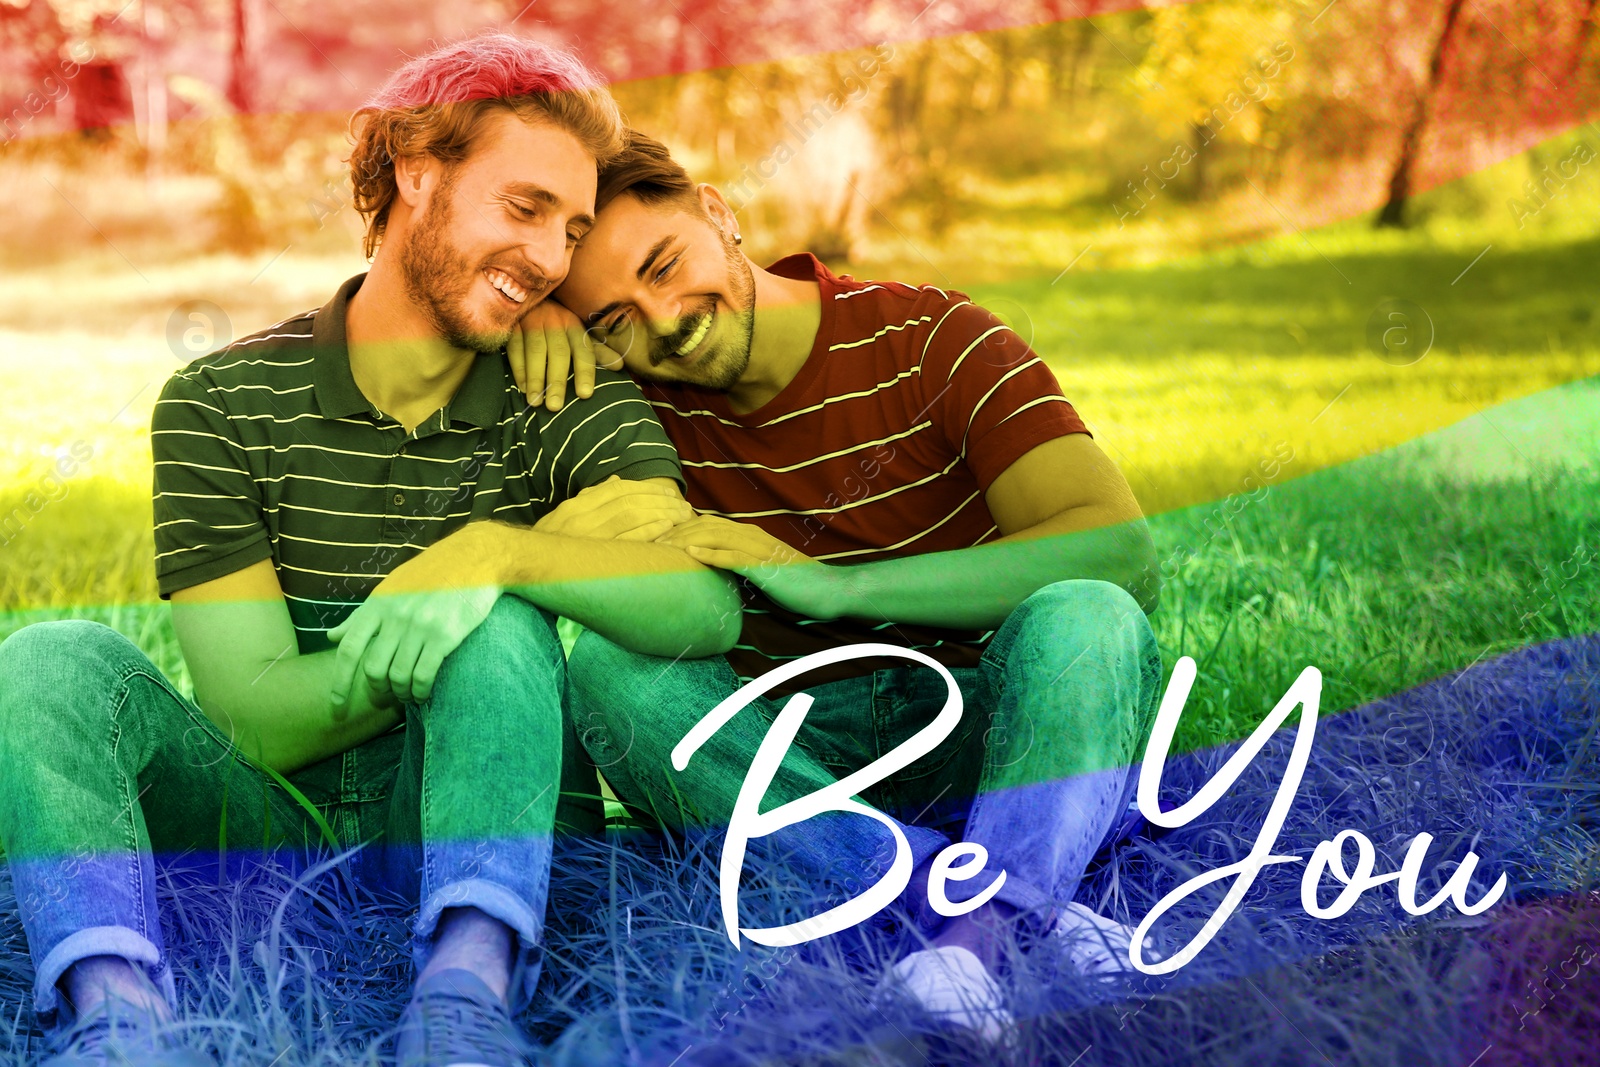 Image of Be You, coming out. Happy gay couple outdoors, toned in rainbow colors